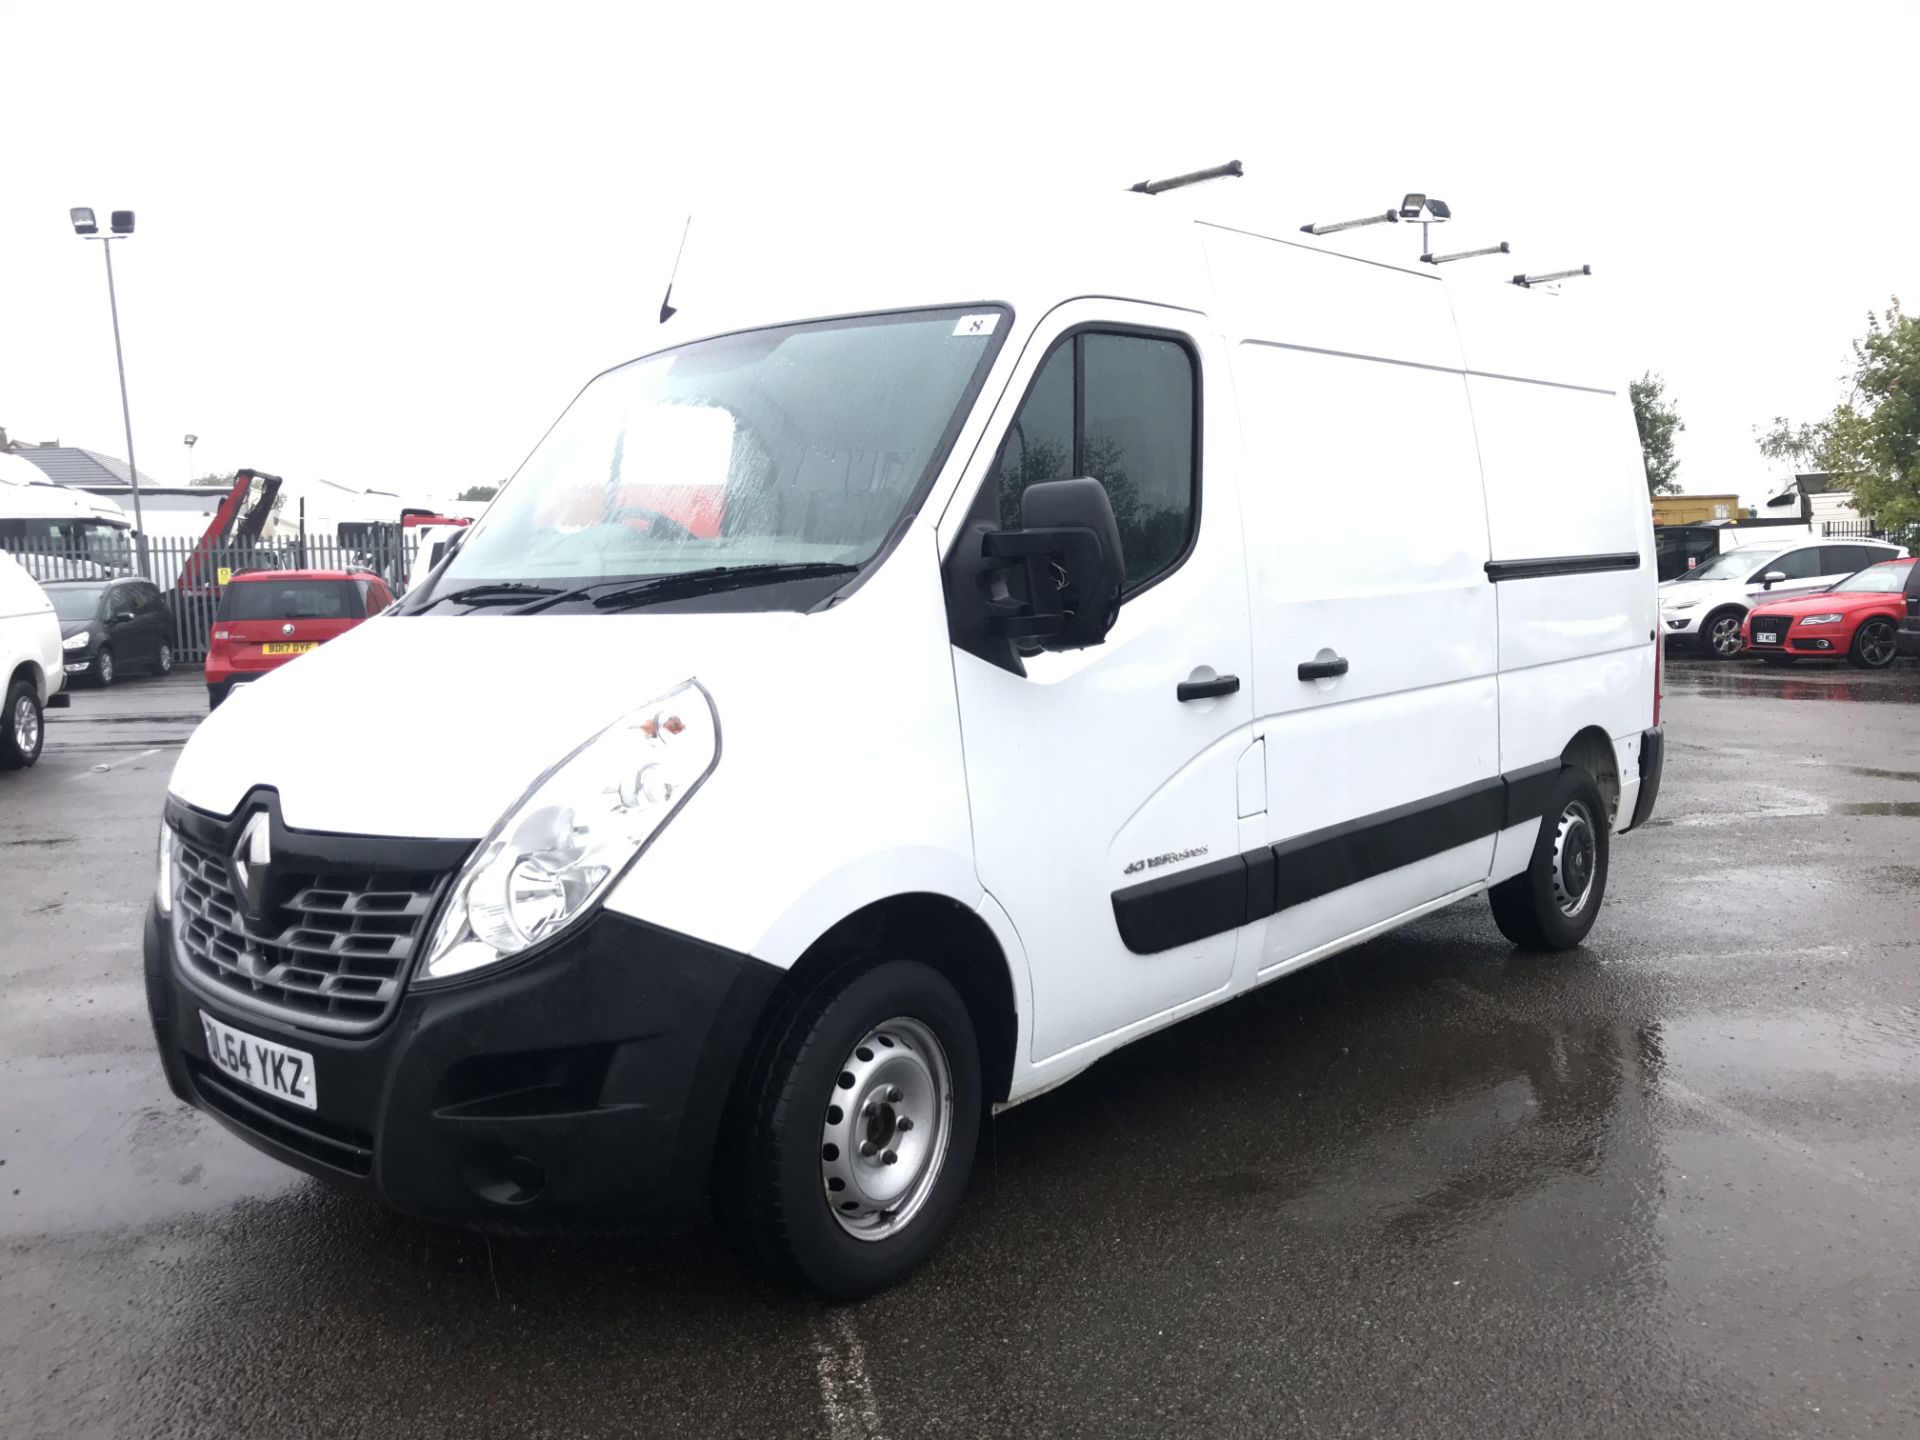 (ON SALE) RENAULT MASTER MM35 BUSINESS EDITION 2.3DCI (125) - ONLY 68K MILES! - 1 KEEPER -NEW MODEL - Image 5 of 11